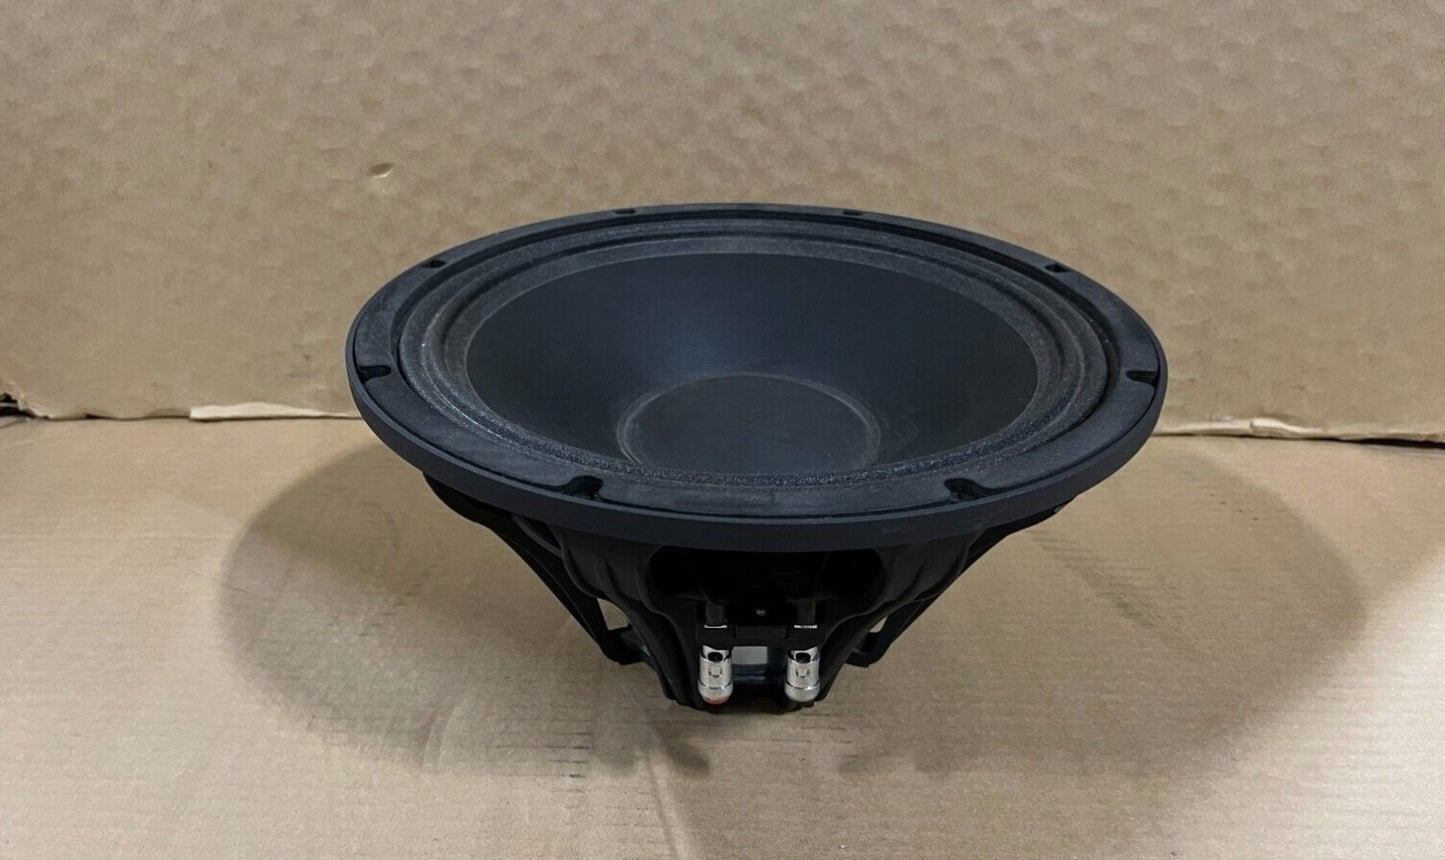 Faital PRO 12FH500 12" Neo 8 Ohm High Power Woofer Midbass 1000W